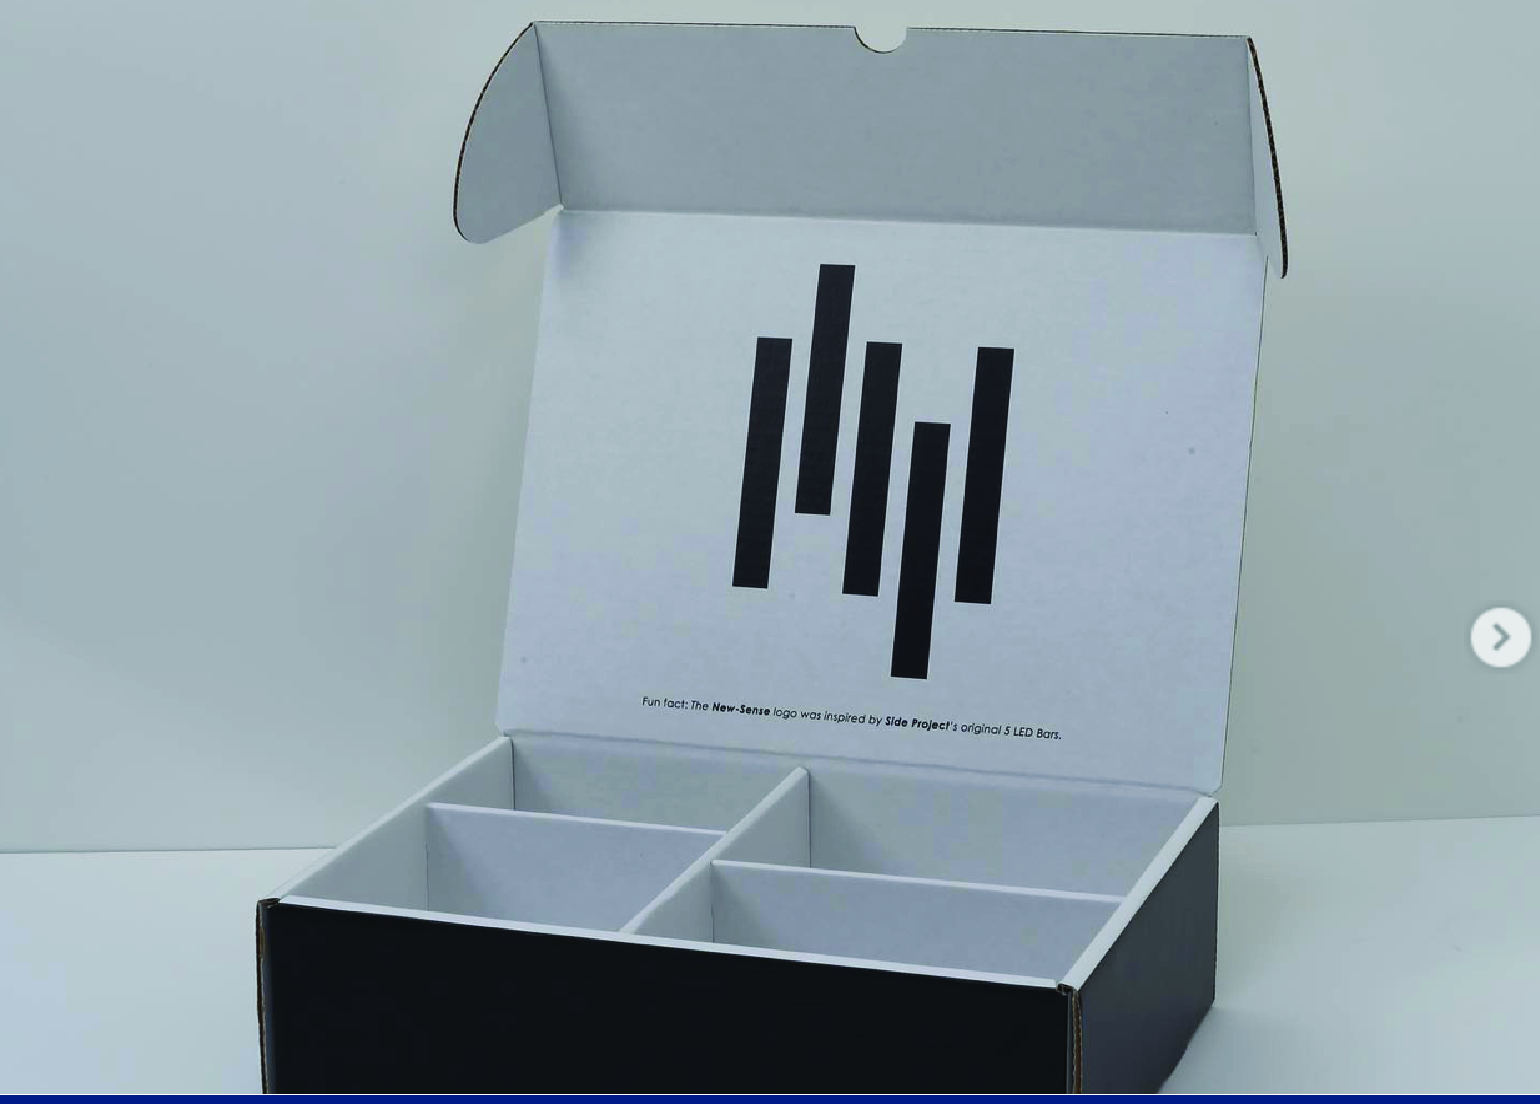 a dim blue colored box with a bar chart on the inside